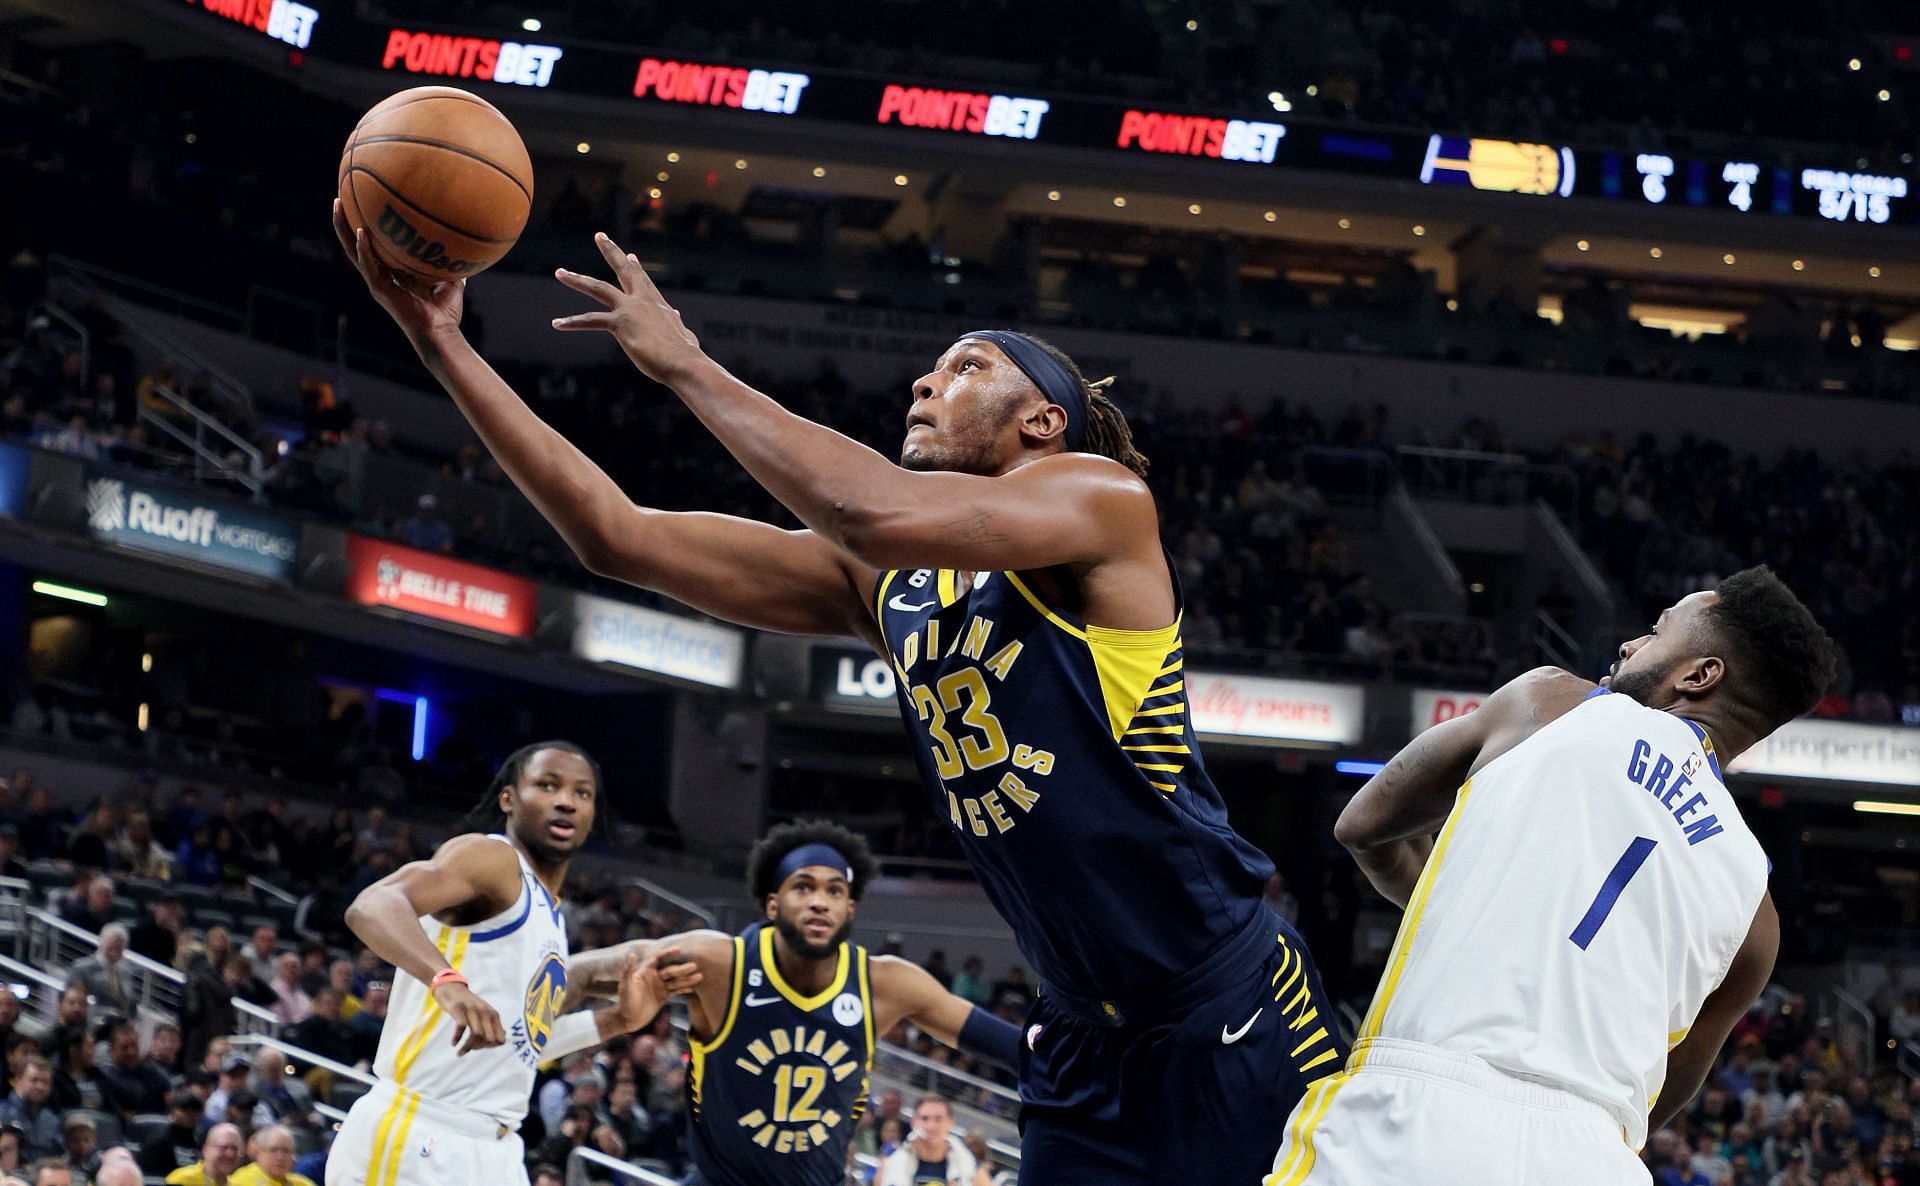 Myles Turner of the Indiana Pacers against the Golden State Warriors